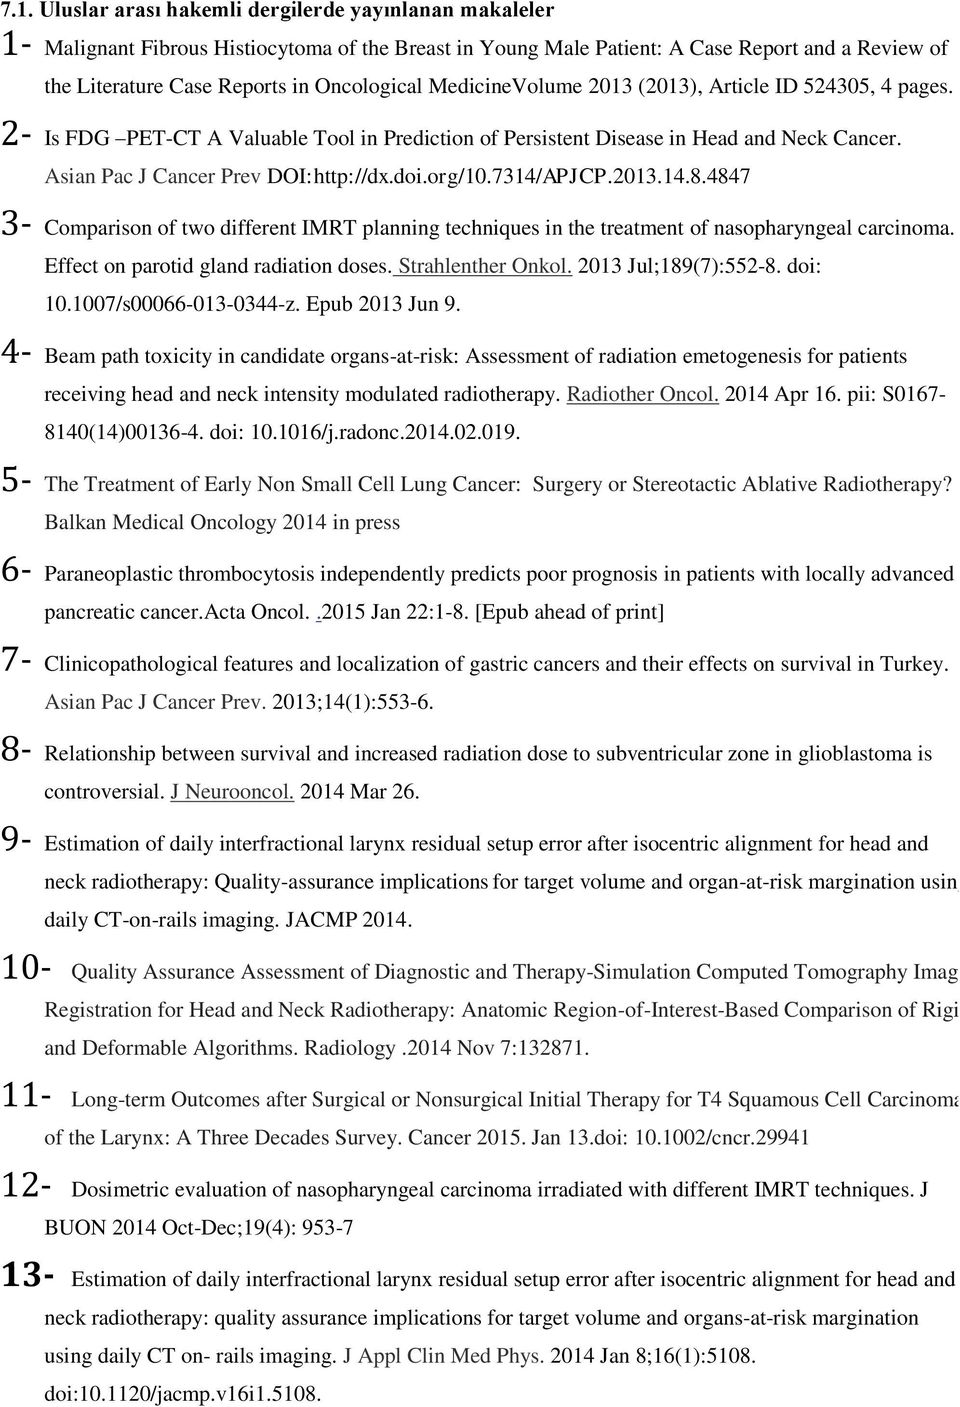 doi.org/10.7314/APJCP.2013.14.8.4847 3- Comparison of two different IMRT planning techniques in the treatment of nasopharyngeal carcinoma. Effect on parotid gland radiation doses. Strahlenther Onkol.